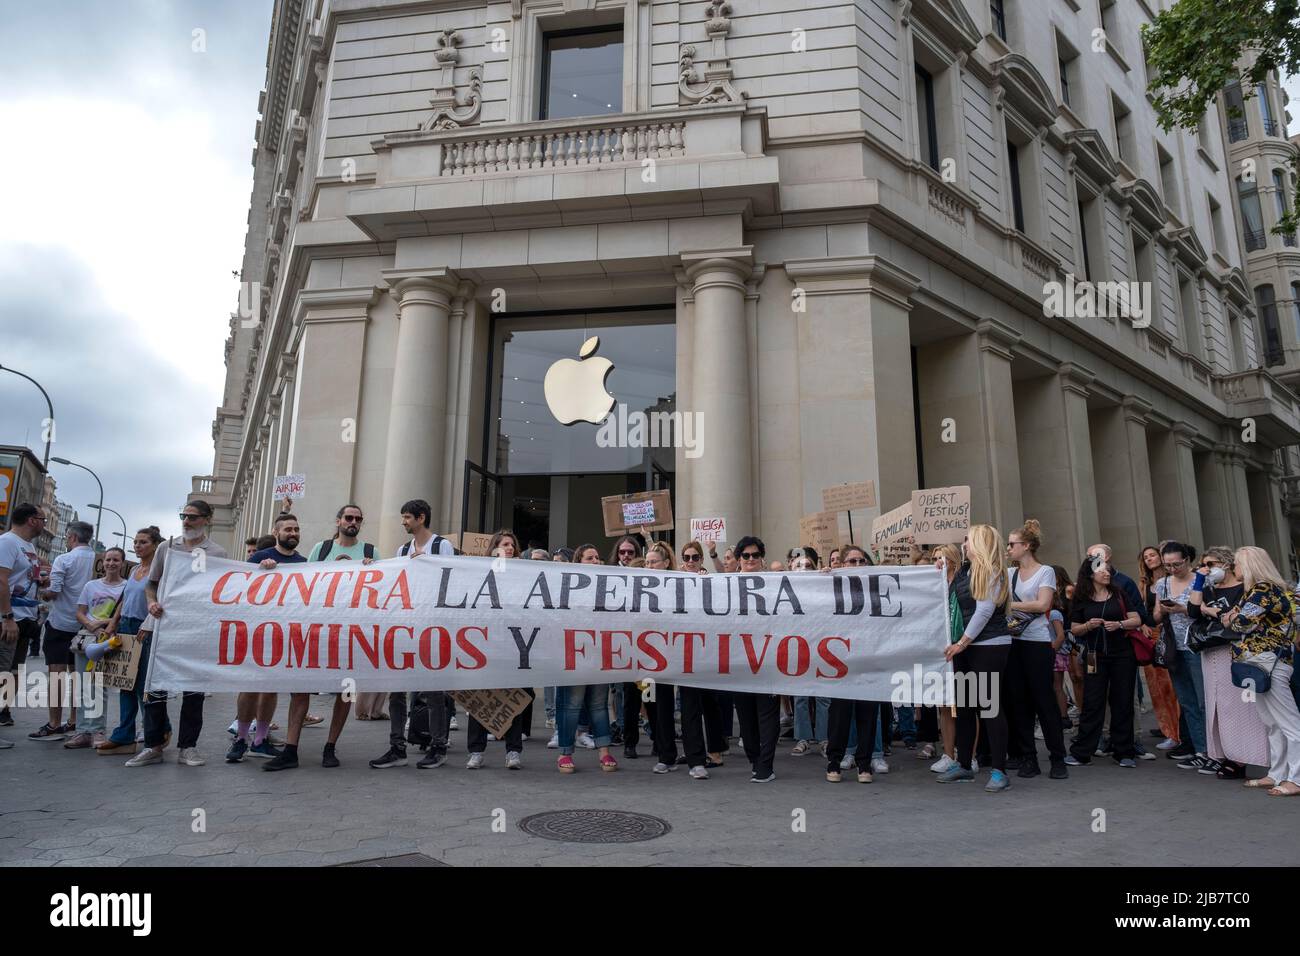 Trade unionists and workers are seen holding the unitary banner against commercial opening on Sundays and public holidays in front of the door of the Apple store in Plaza de Catalunya. Shouting 'we want to reconcile work and family', trade unionists and workers in the retail sector have demonstrated in front of the emblematic shops on Passeig de Gràcia to protest the extension of working hours to Sundays approved by the Government of the Generalitat of Catalonia and ratified by the Barcelona City Council in order to define a new tourist area for commercial opening. Stock Photo